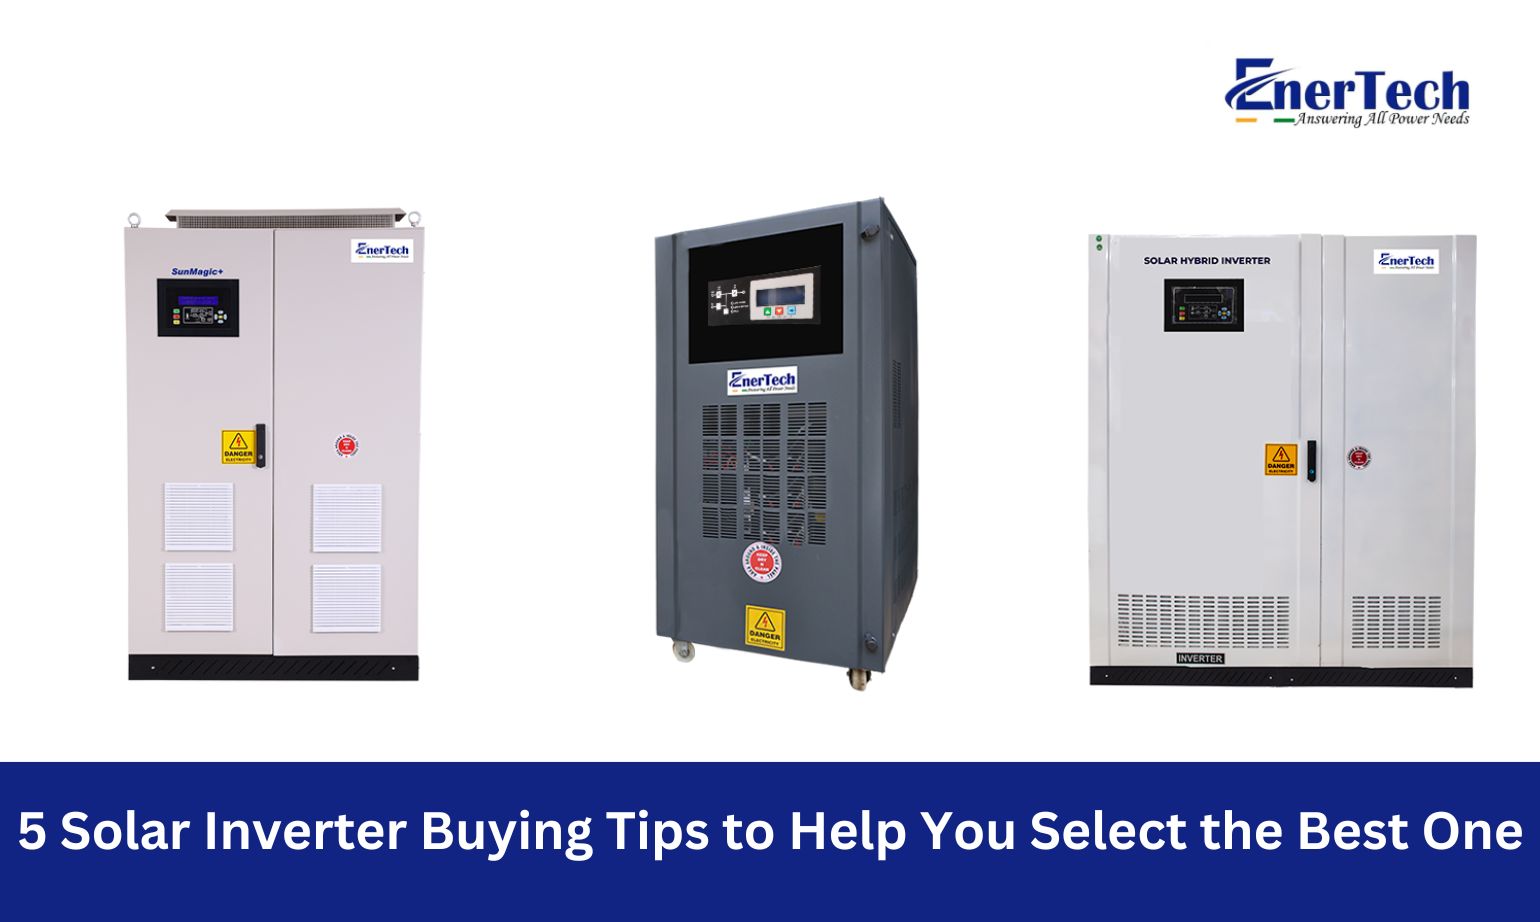 https://enertechups.com/wp-content/uploads/2023/05/5-Solar-Inverter-Buying-Tips-to-Help-You-Select-the-Best-One.jpg